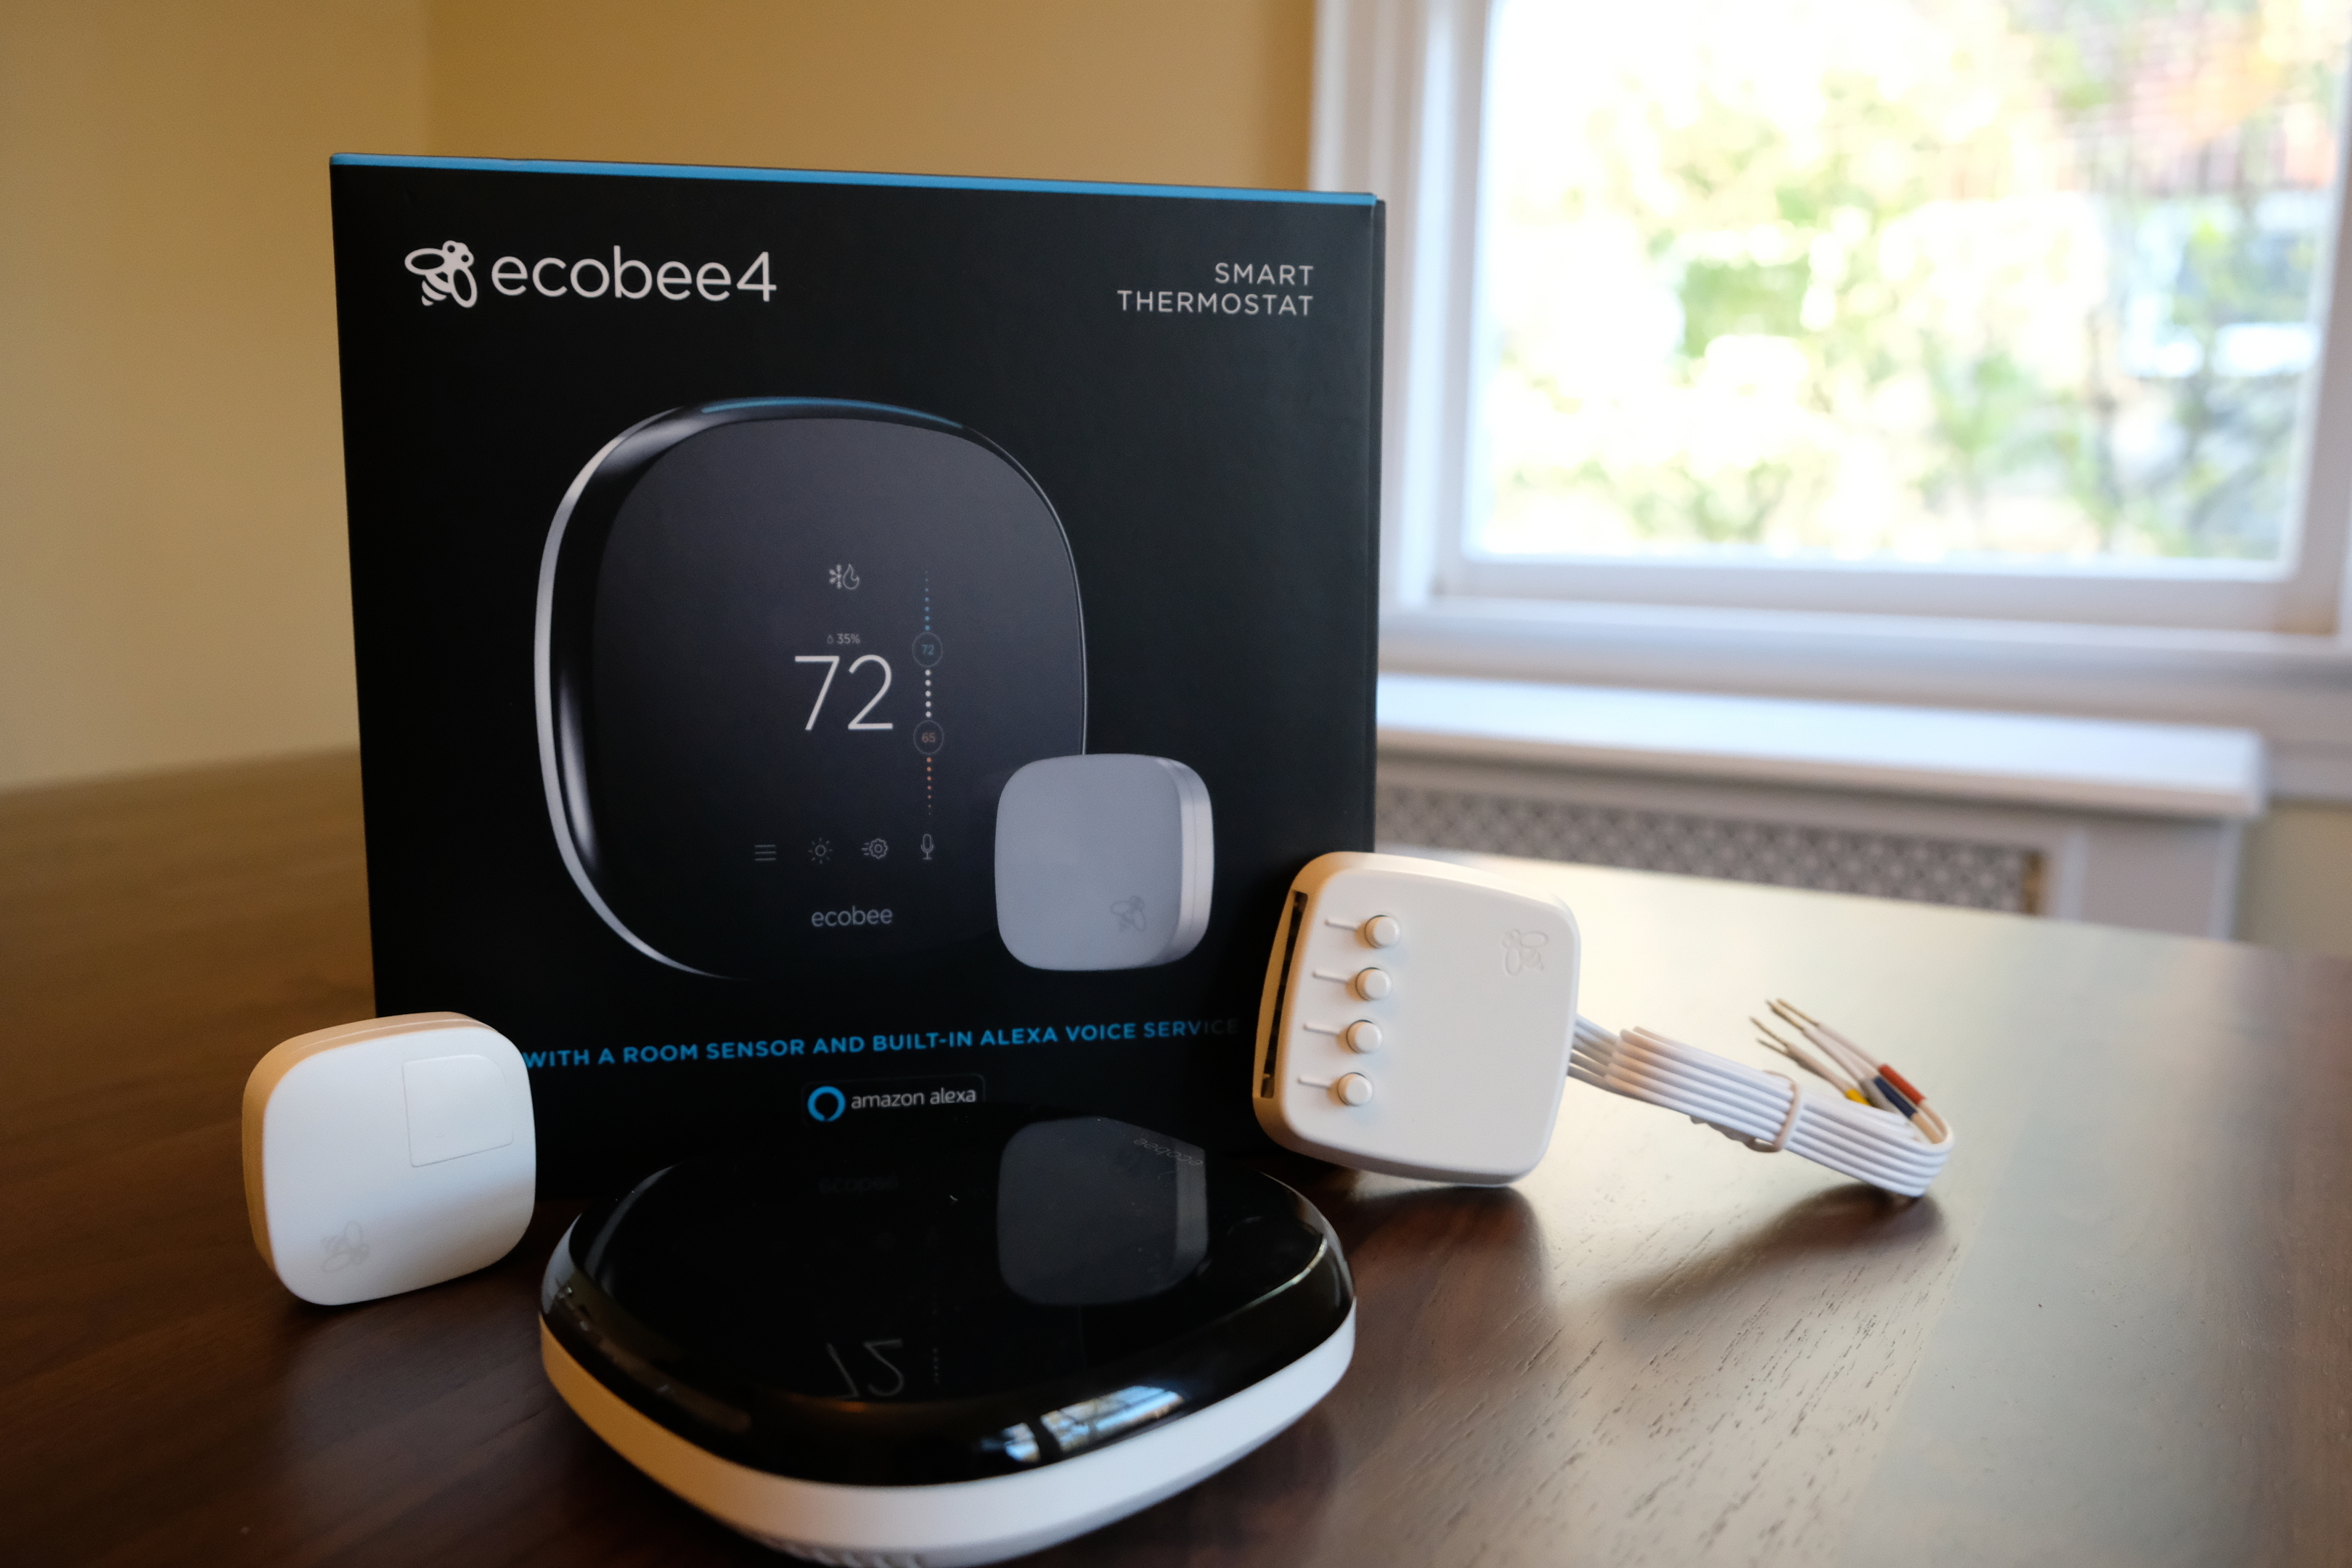 FILE - This Nov. 11, 2018, photo shows an Ecobee smart thermostat, room sensor and connection components in Hastings-on-Hudson, N.Y. Smart thermostats, which let consumers adjust their home temperatures remotely using any internet-connected device, are among the most popular smart home technologies, with the global smart thermostat market surpassing $1 billion in 2017, according to Research and Markets. (AP Photo/Cathy Bussewitz, File)